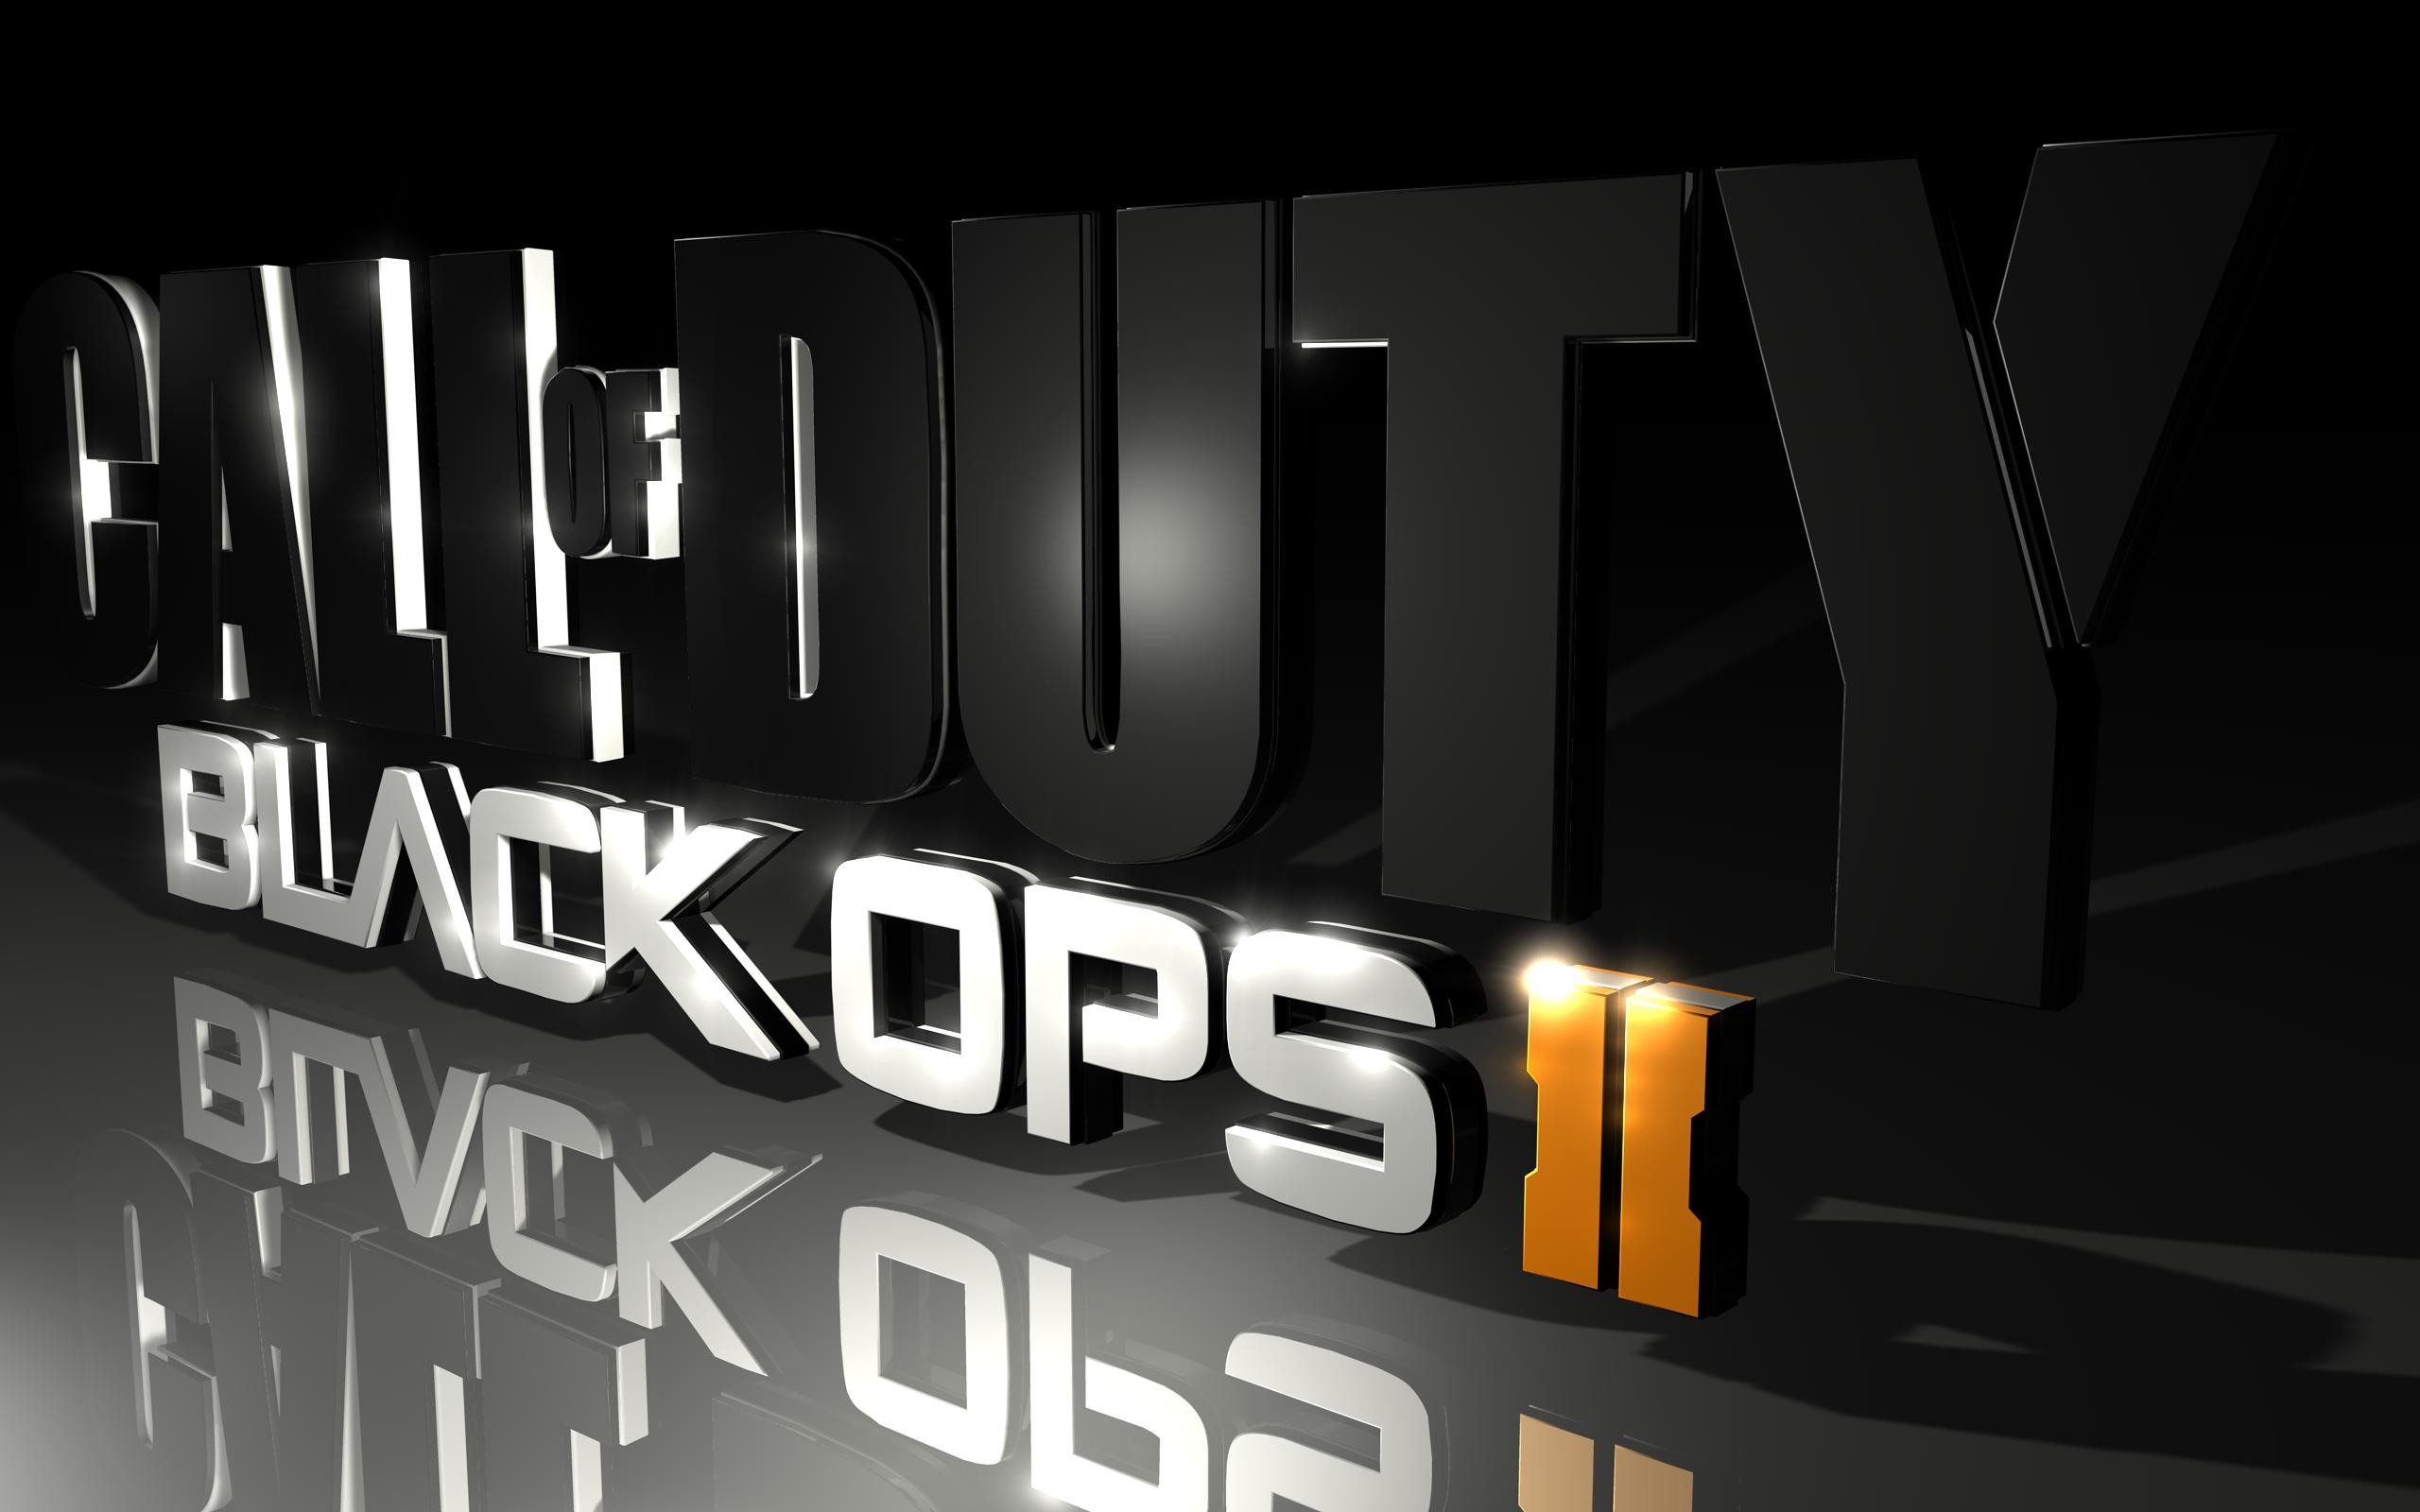 2560x1600 Black Ops Wallpapers - Full HD wallpaper search